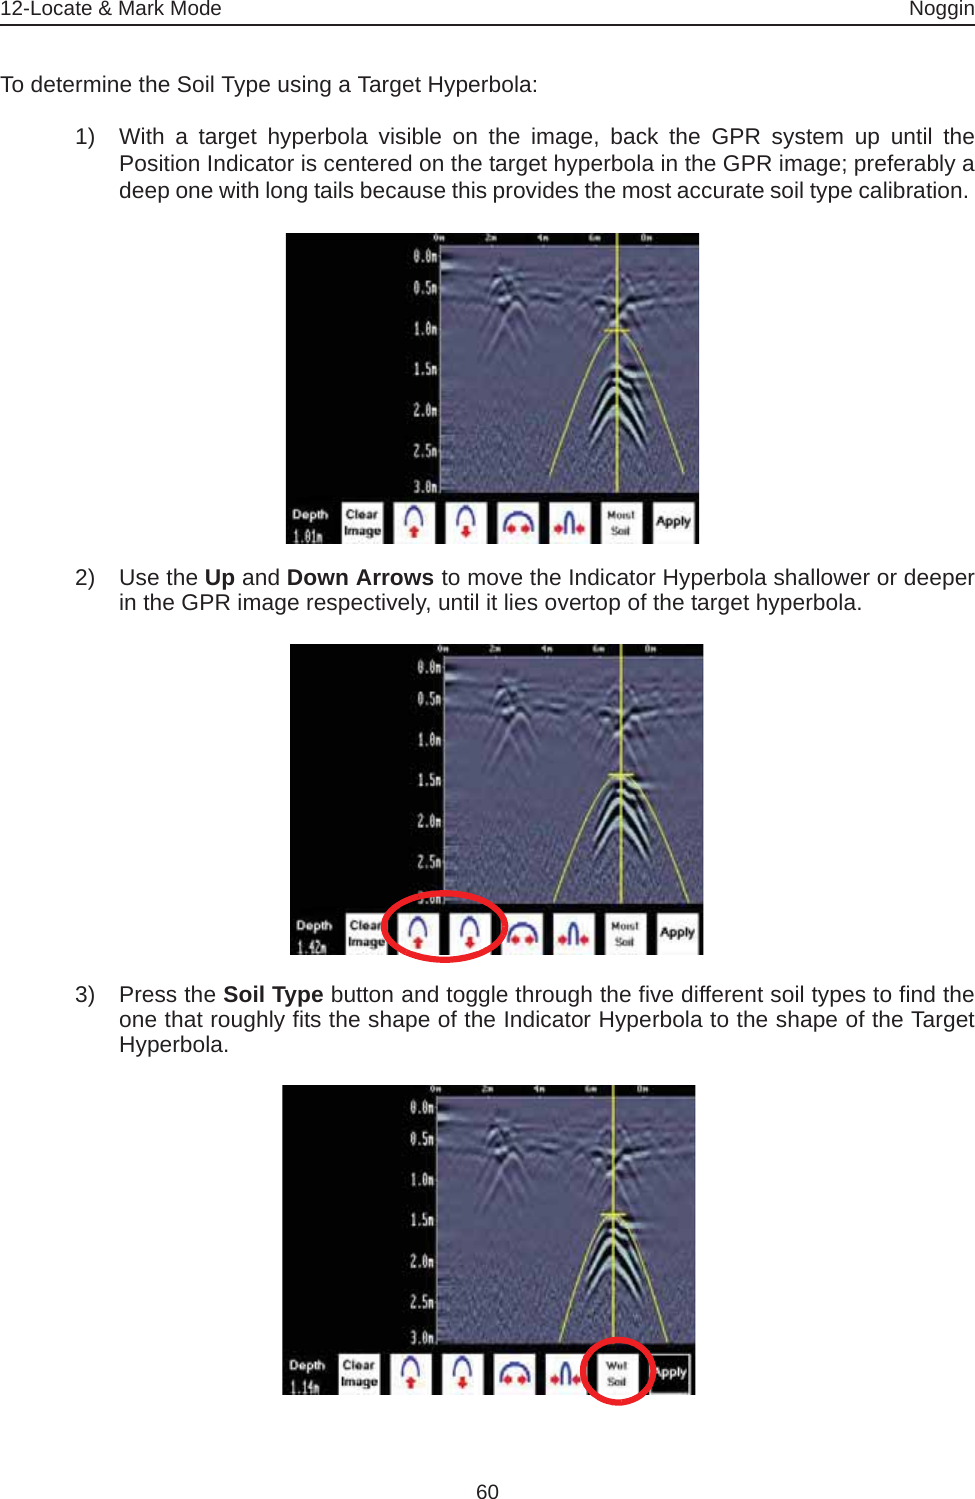 12-Locate &amp; Mark Mode Noggin60To determine the Soil Type using a Target Hyperbola:1) With a target hyperbola visible on the image, back the GPR system up until thePosition Indicator is centered on the target hyperbola in the GPR image; preferably adeep one with long tails because this provides the most accurate soil type calibration. 2) Use the Up and Down Arrows to move the Indicator Hyperbola shallower or deeperin the GPR image respectively, until it lies overtop of the target hyperbola. 3) Press the Soil Type button and toggle through the five different soil types to find theone that roughly fits the shape of the Indicator Hyperbola to the shape of the TargetHyperbola.